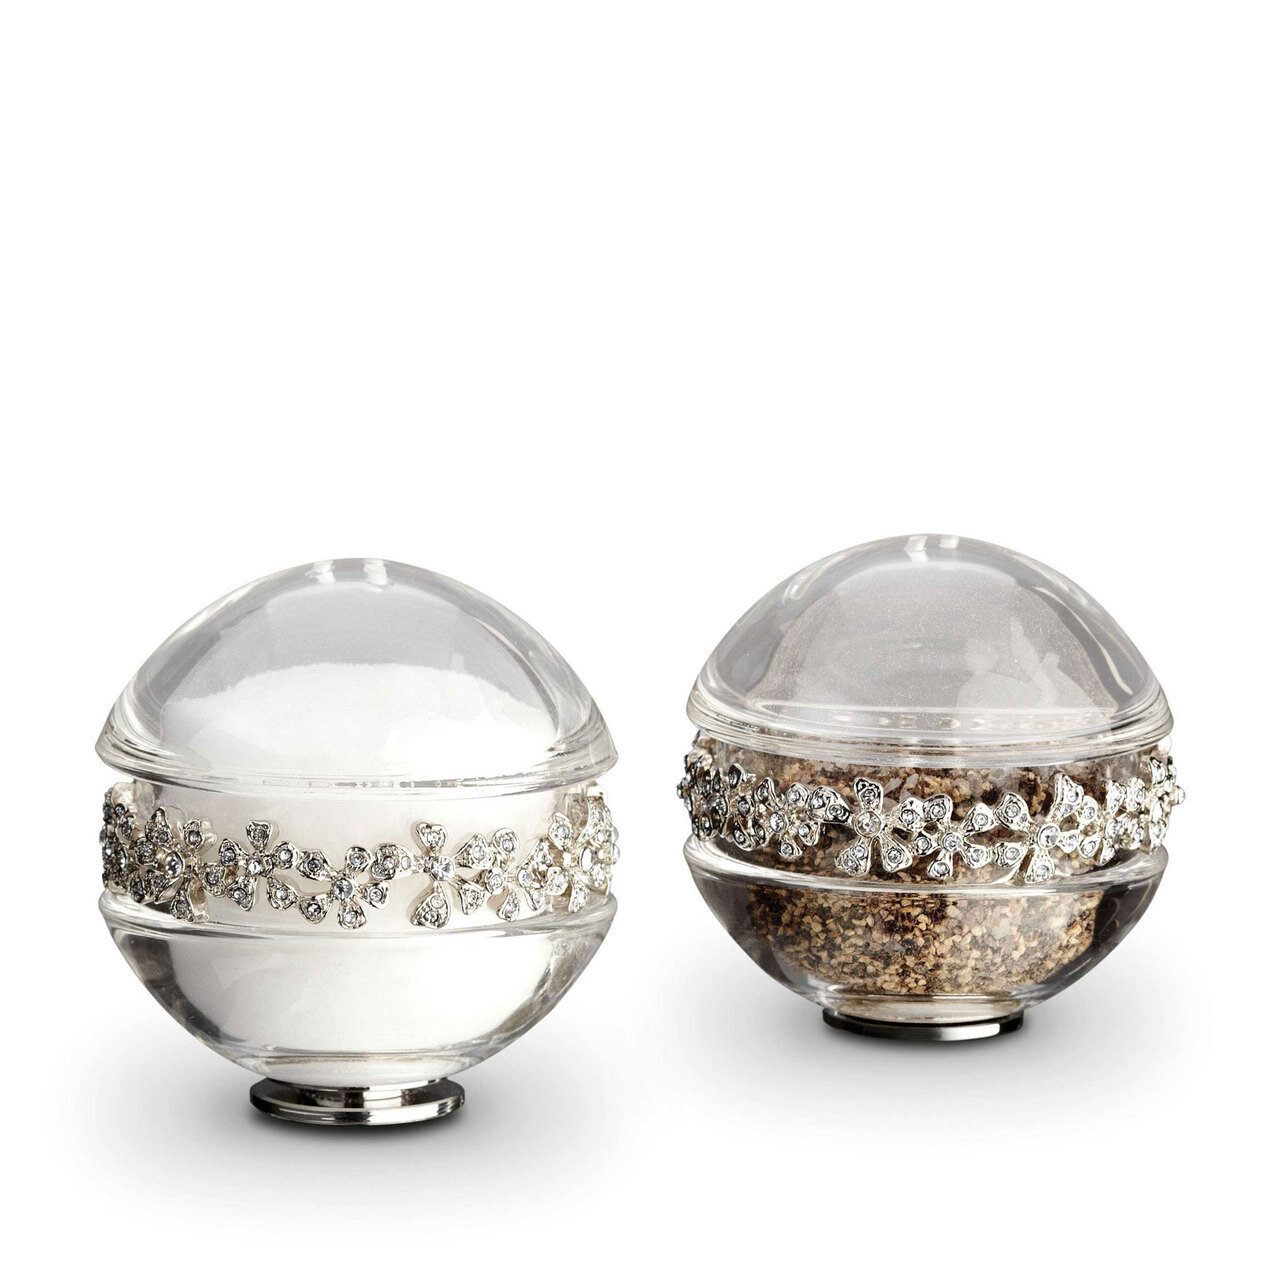 L'Objet Platinum with White Crystals Salt and Pepper Shaker Garland Spice Jewels